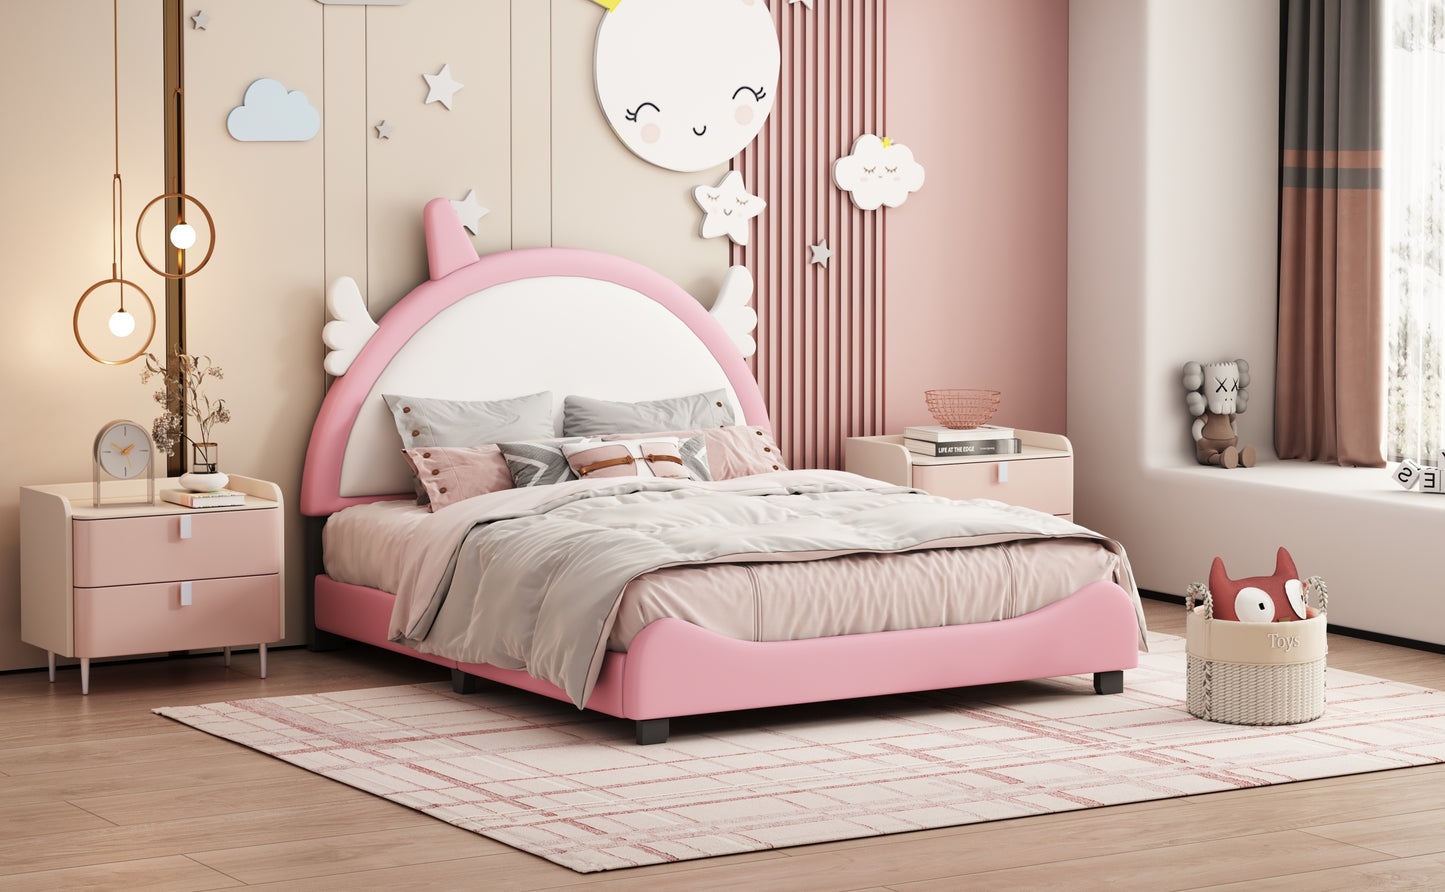 Cute Full size Upholstered Bed With Unicorn Shape Headboard,Full Size Platform Bed with Headboard and Footboard,White+Pink